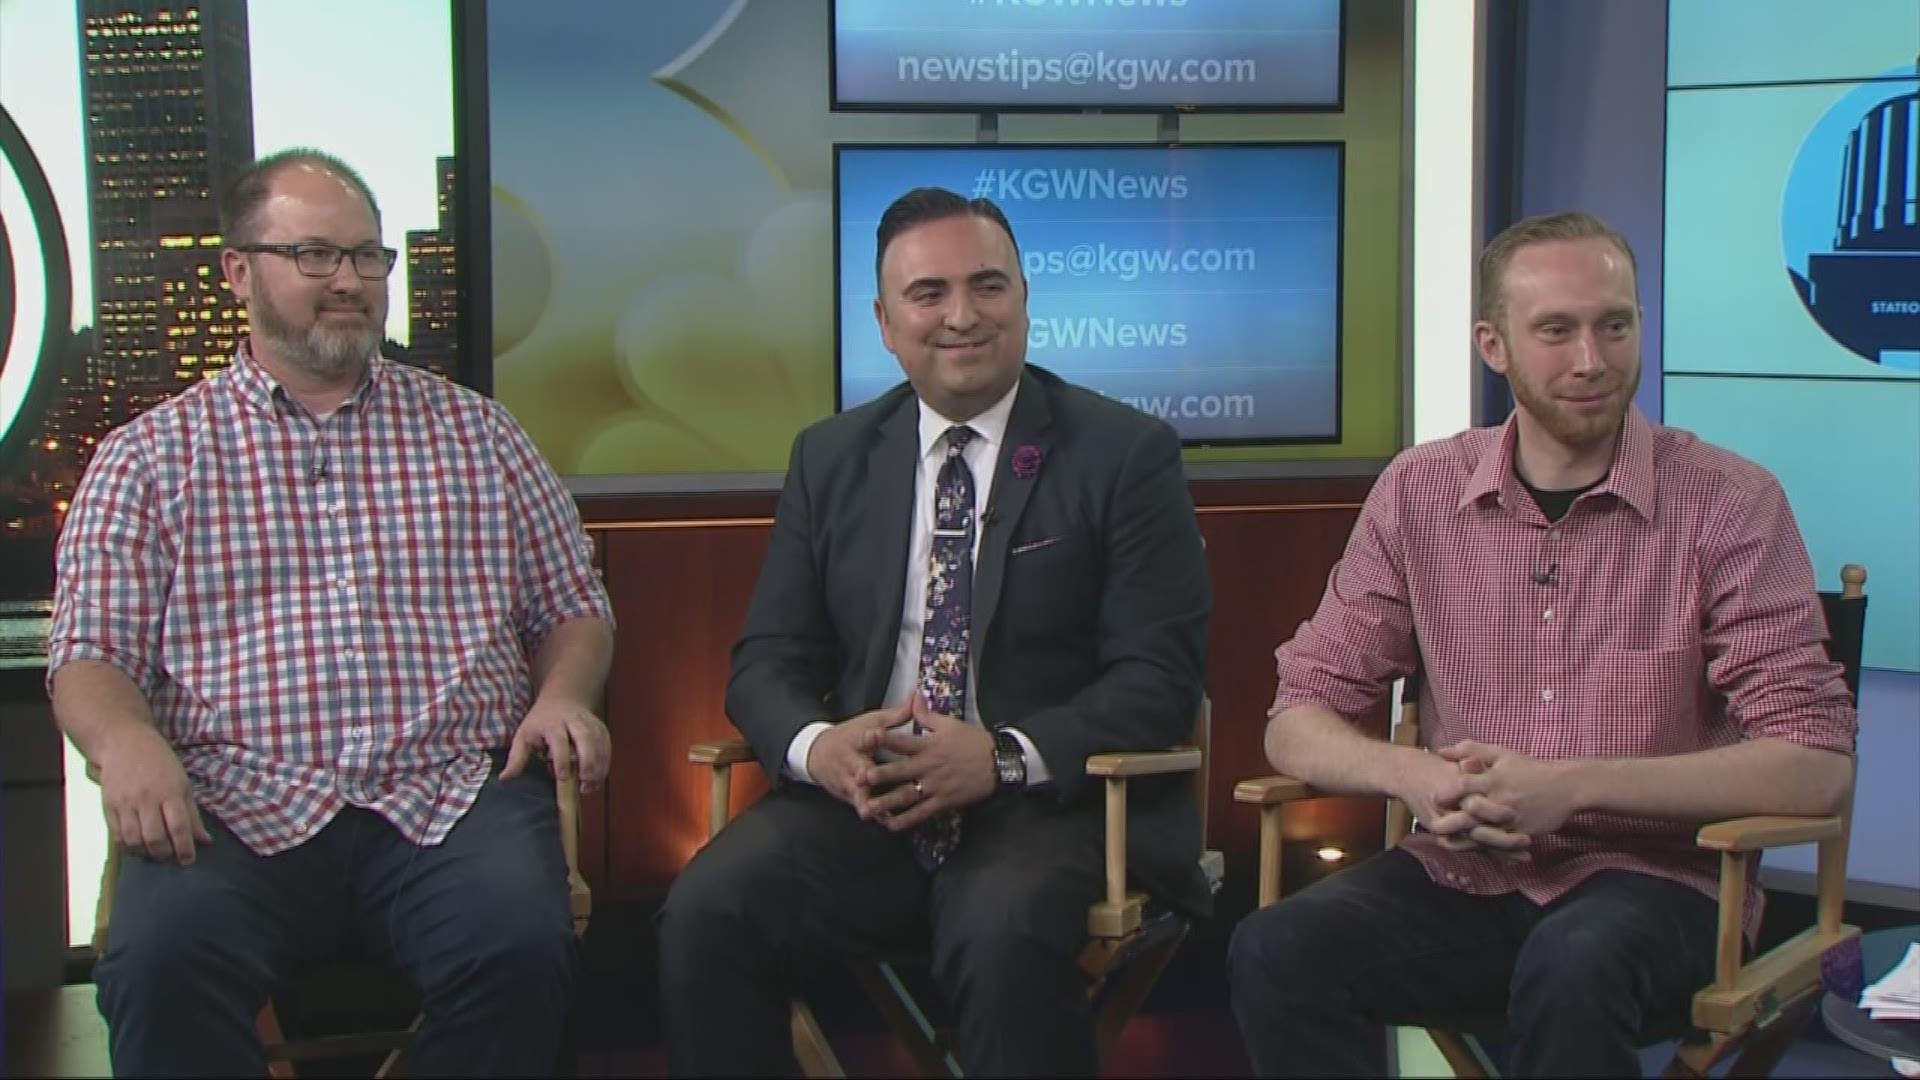 The co-hosts of KGW's 3-on-3 Blazers podcast, Orlando Sanchez, Jared Cowley and Nate Hanson, reflect on the Portland Trail Blazers' playoff run and what made the 2018-19 season so special.